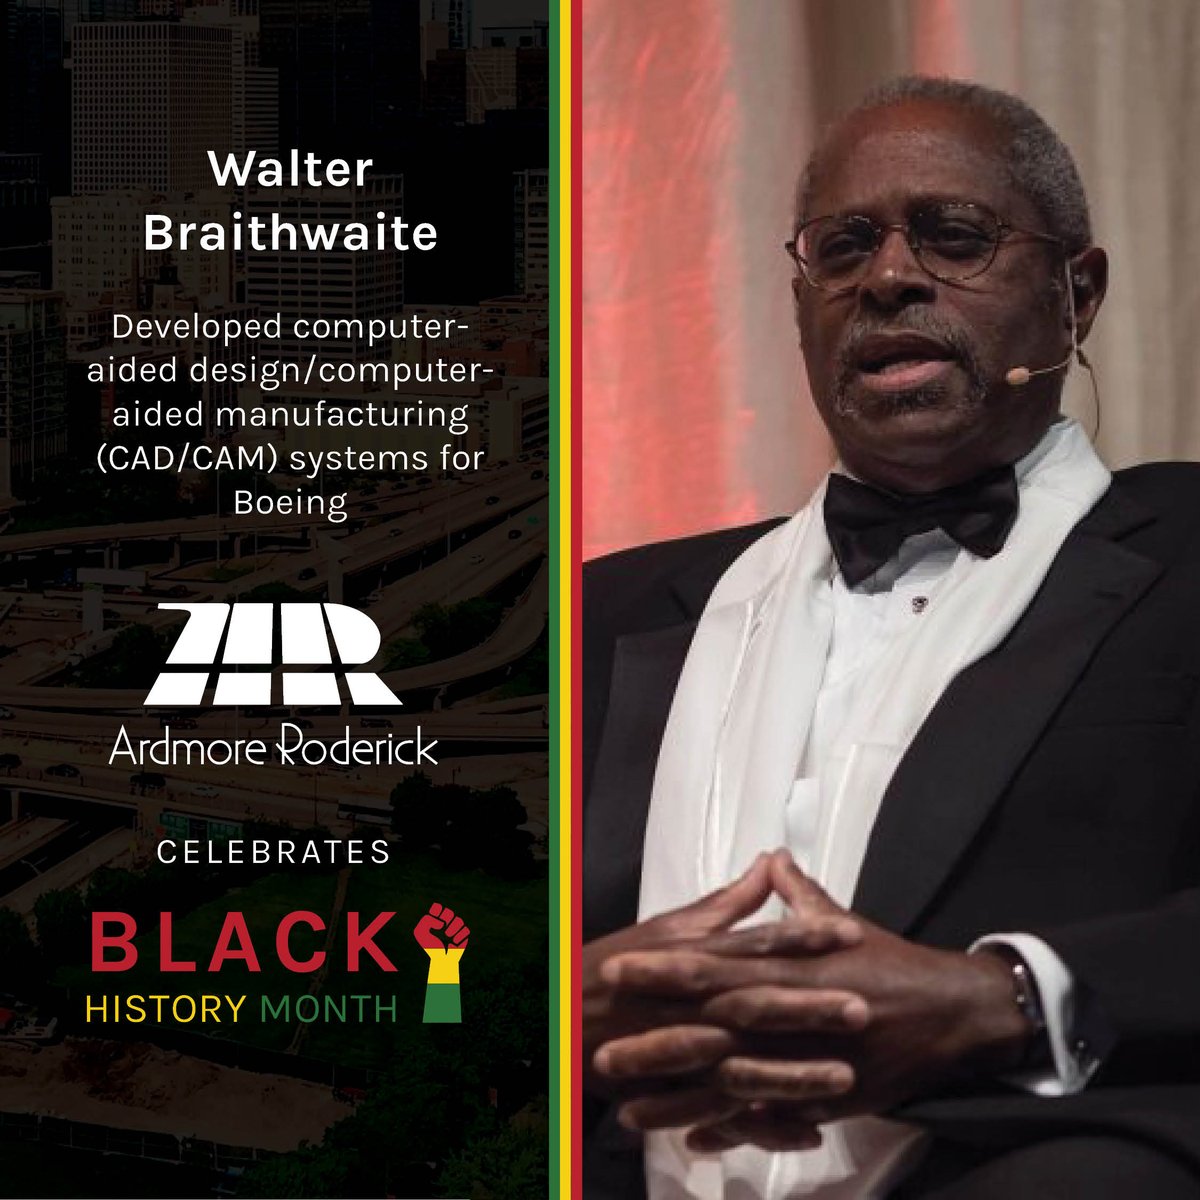 In honor of Black History Month, we're highlighting some extraordinary #blackengineers.

In 1966, Walter Braithwaite joined Boeing & led his team to develop computer-aided design (CAD/CAM) systems. This led the way for airplanes & many other products! 

#blackhistorymonth